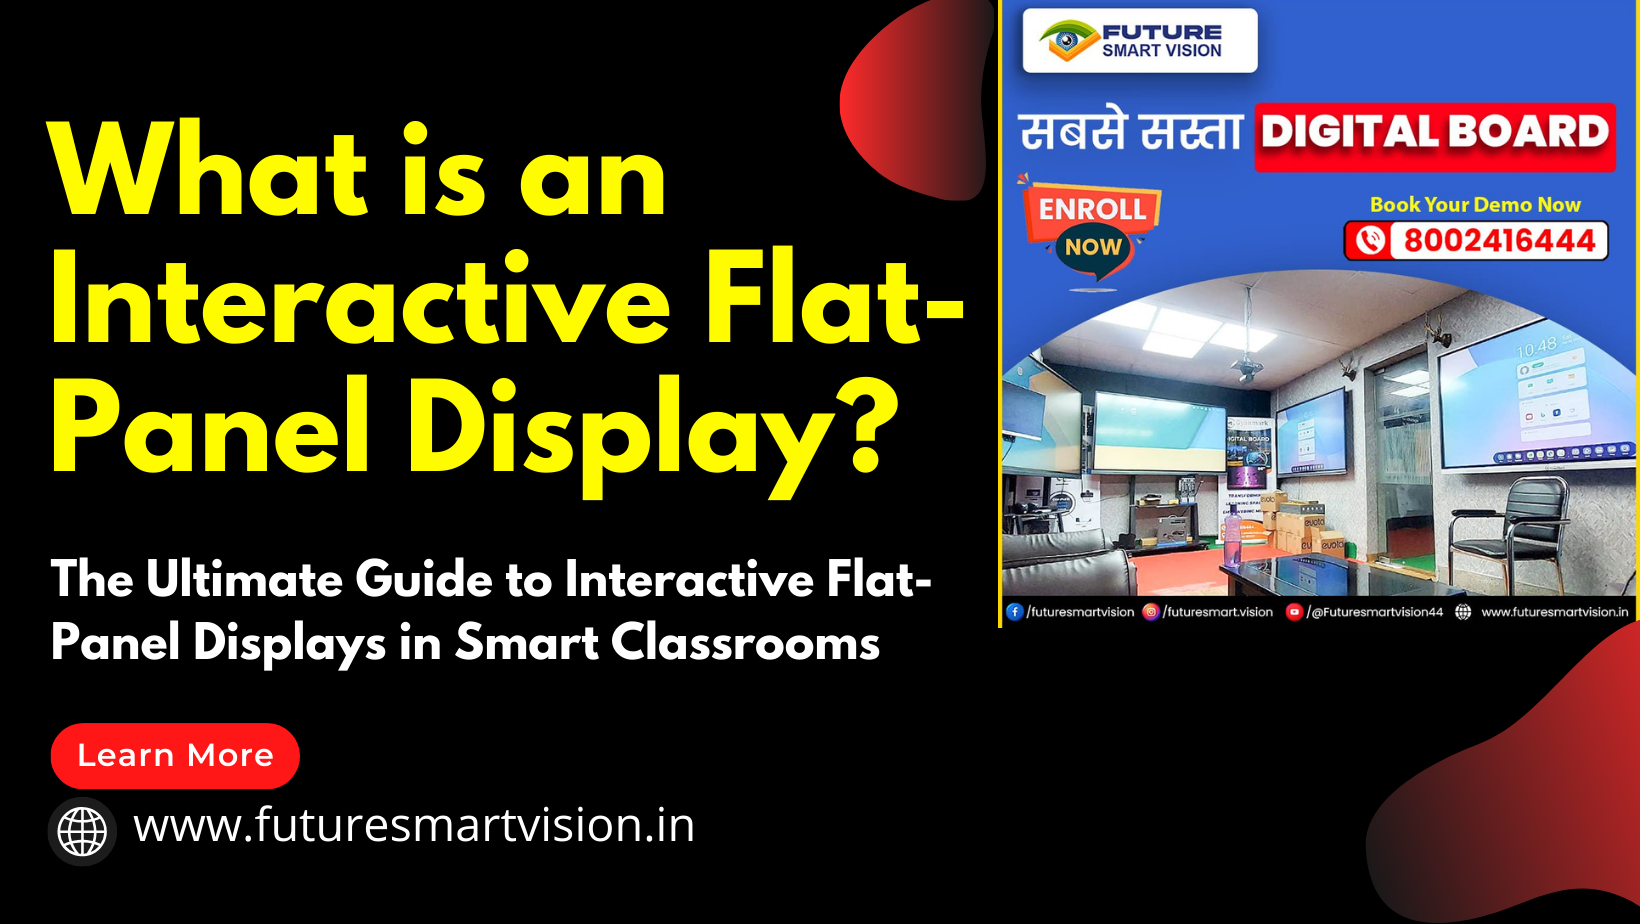 What is an Interactive Flat-Panel Display?